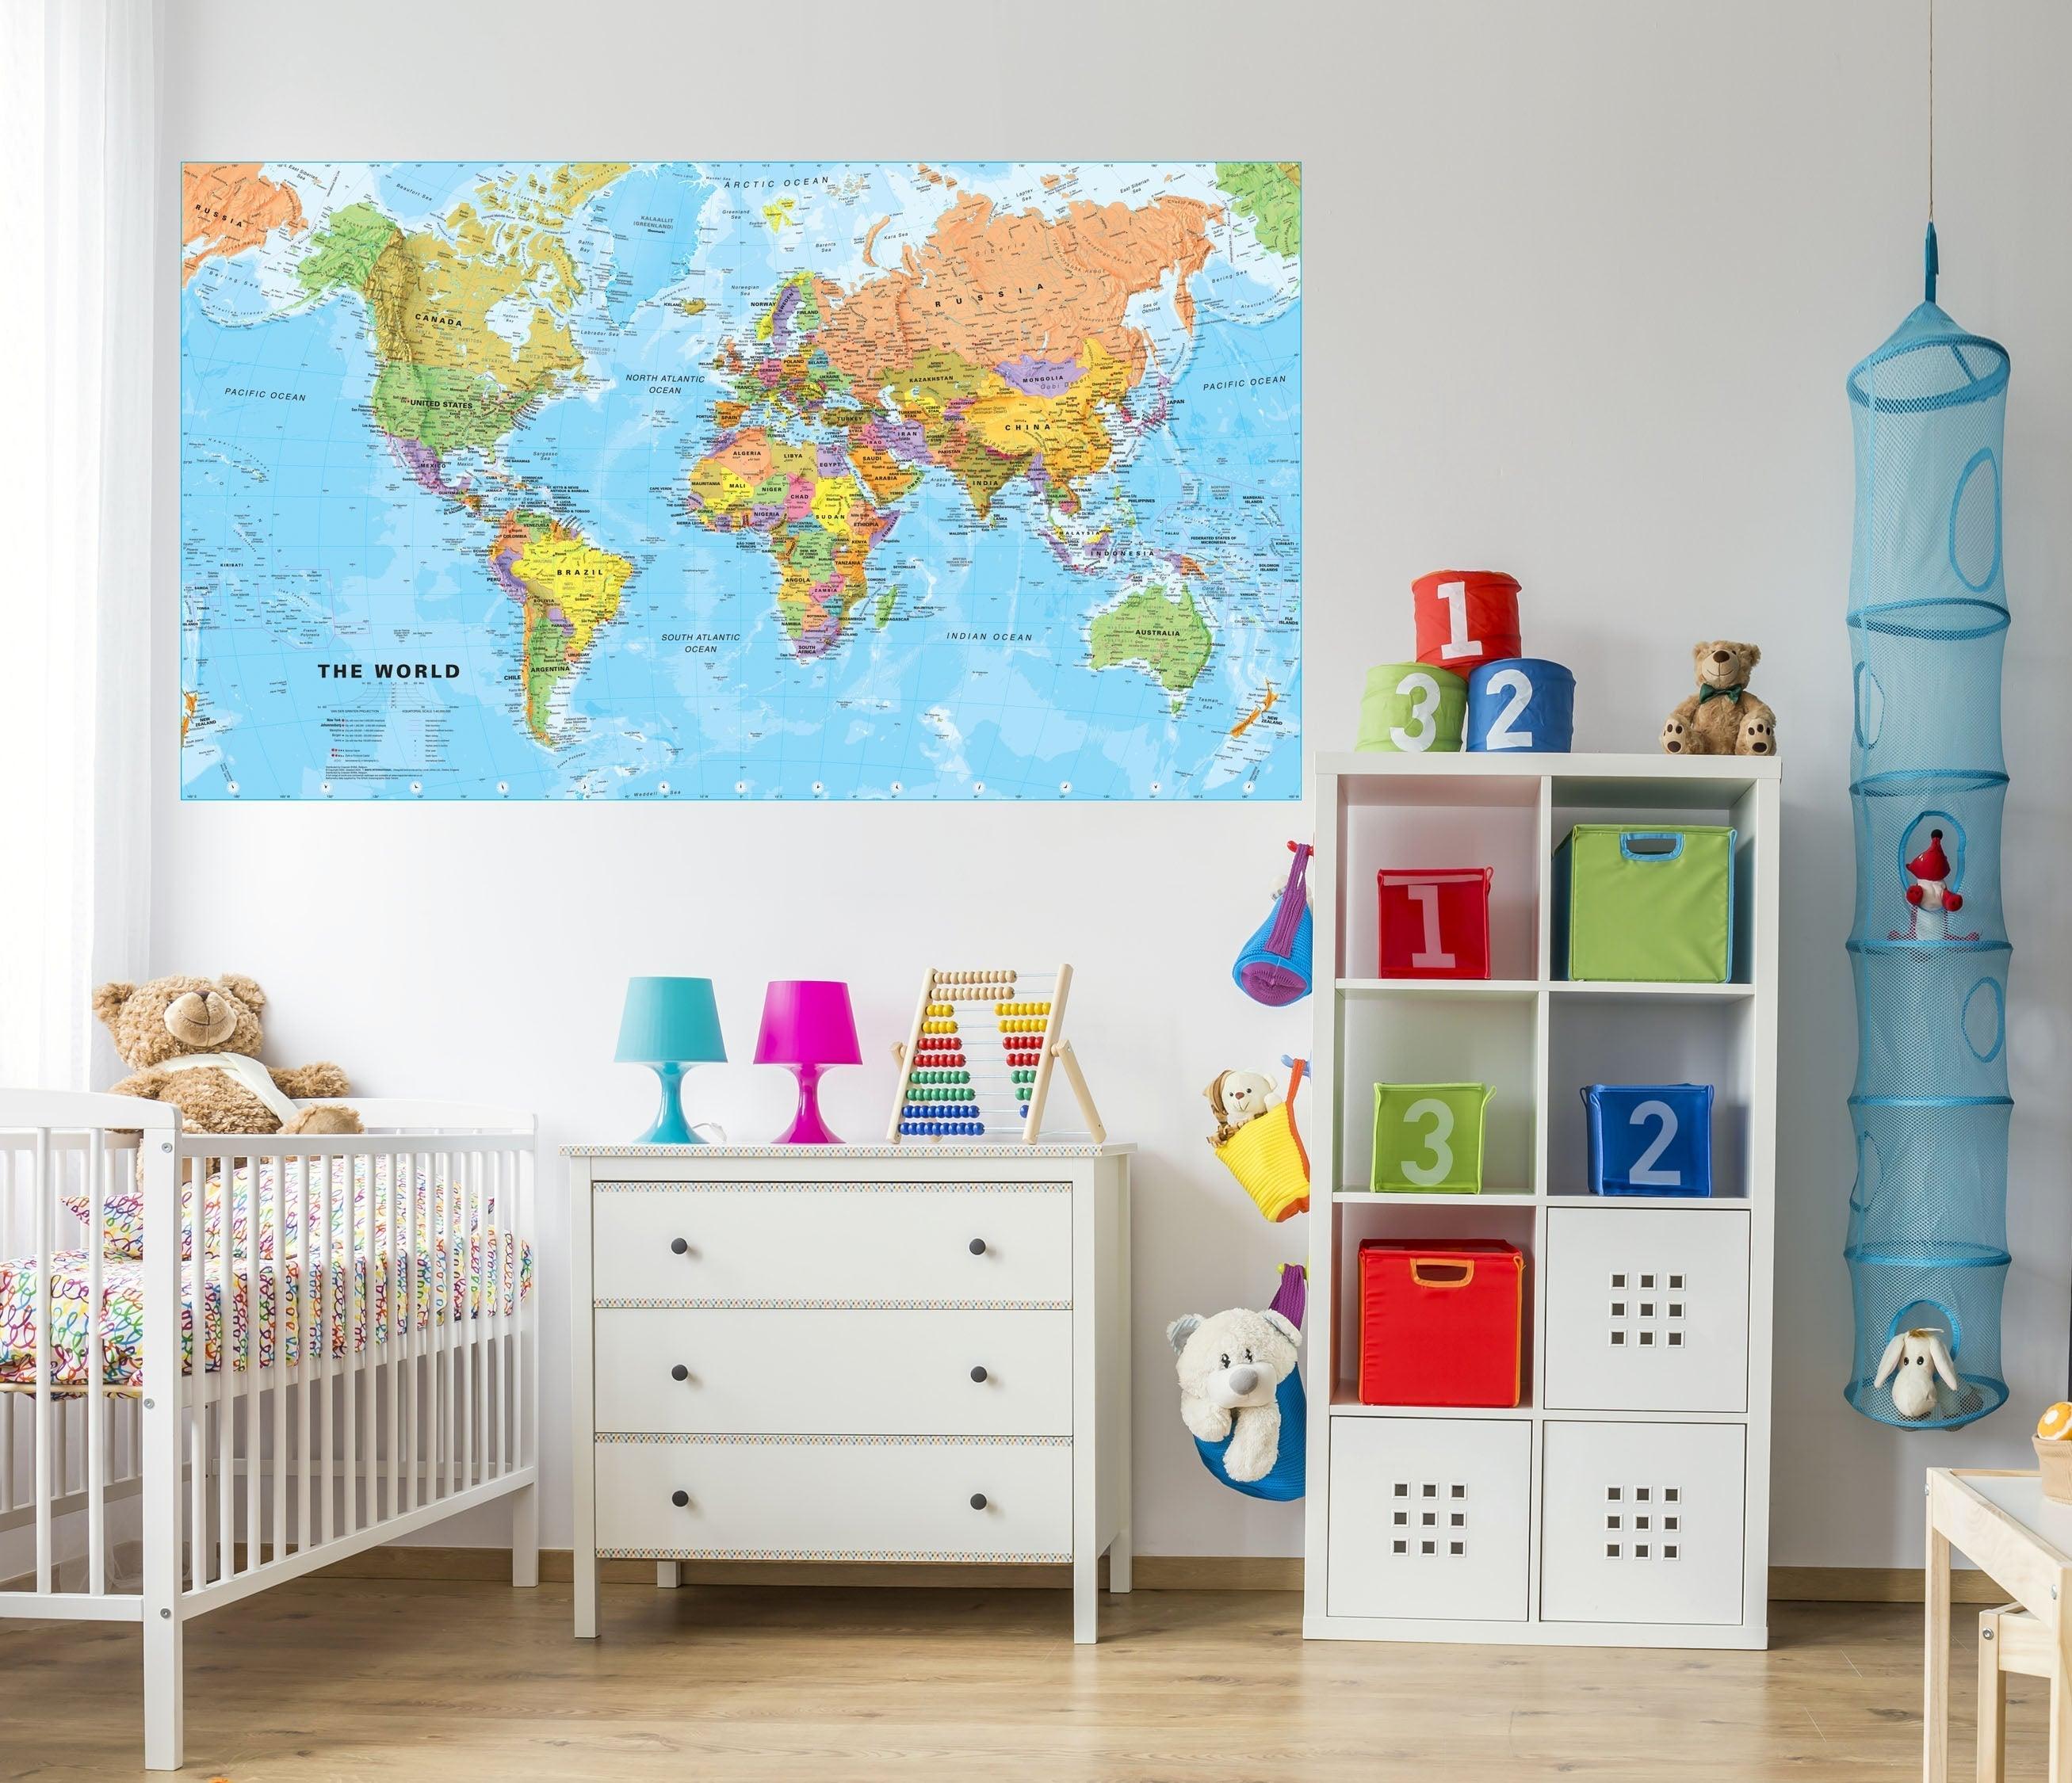 World Map Wall Decal Sticker Wallpaper, PEEL-N-STICK, removable anytime.